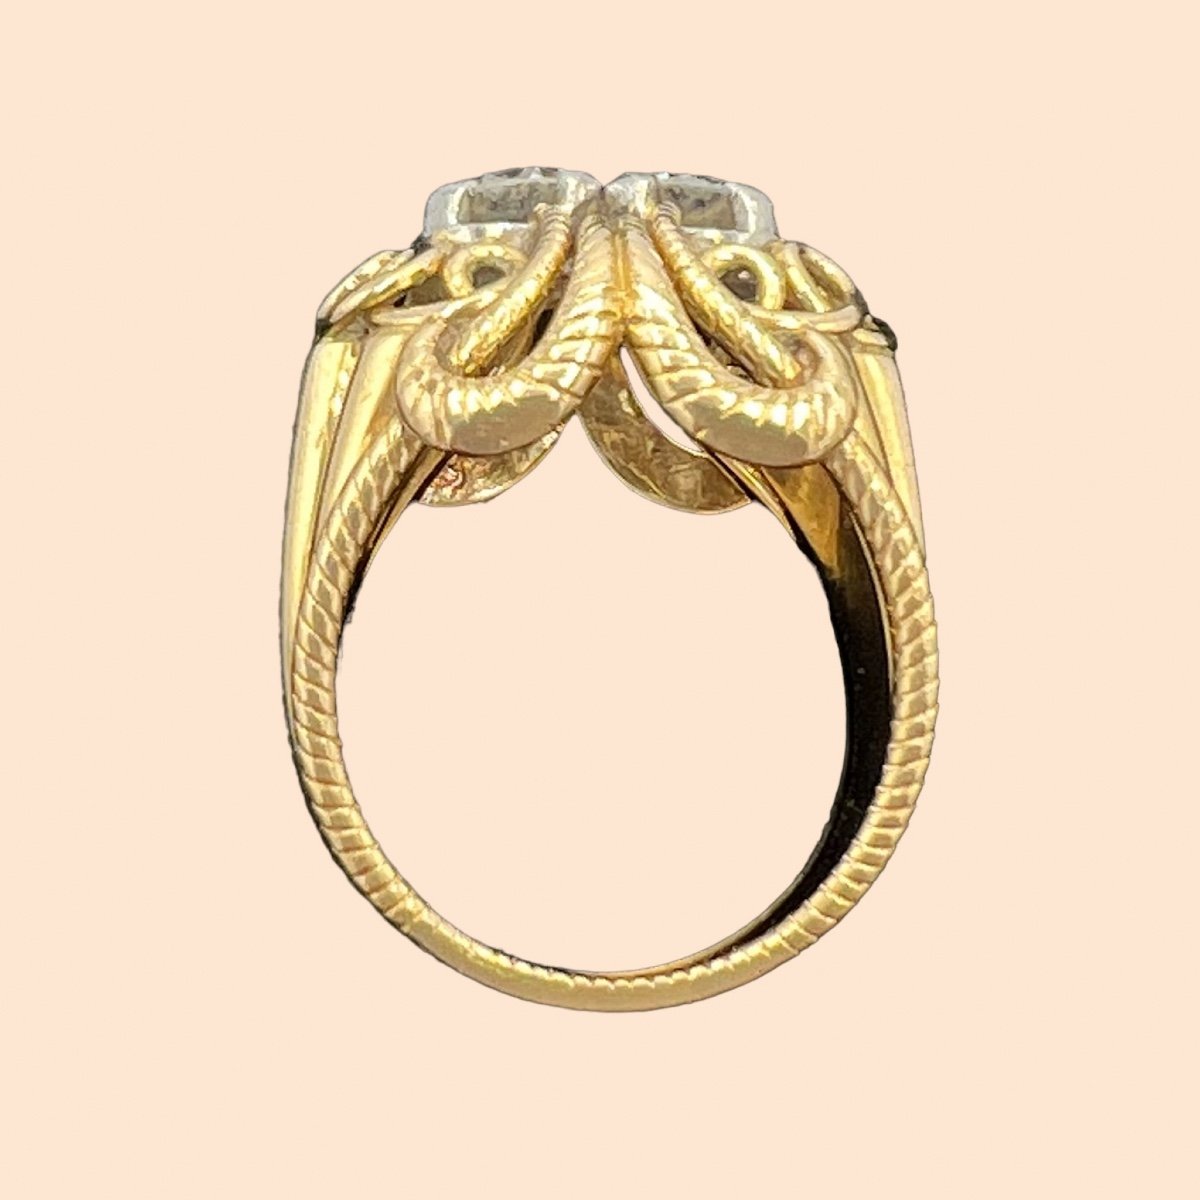 Superb Cocktail Ring From The 1950s In 18 Carat Gold, Set With Two Modern Cut Diamonds,-photo-7